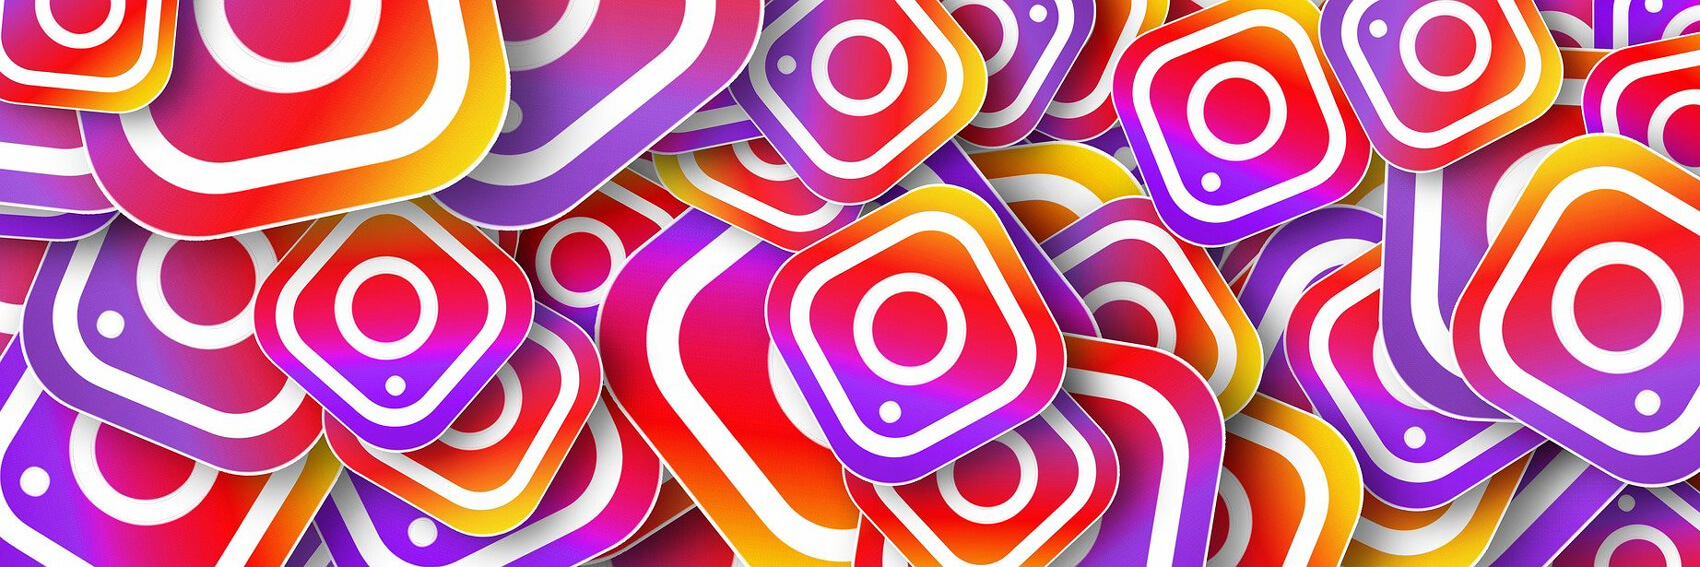 Why Instagram marketing matters